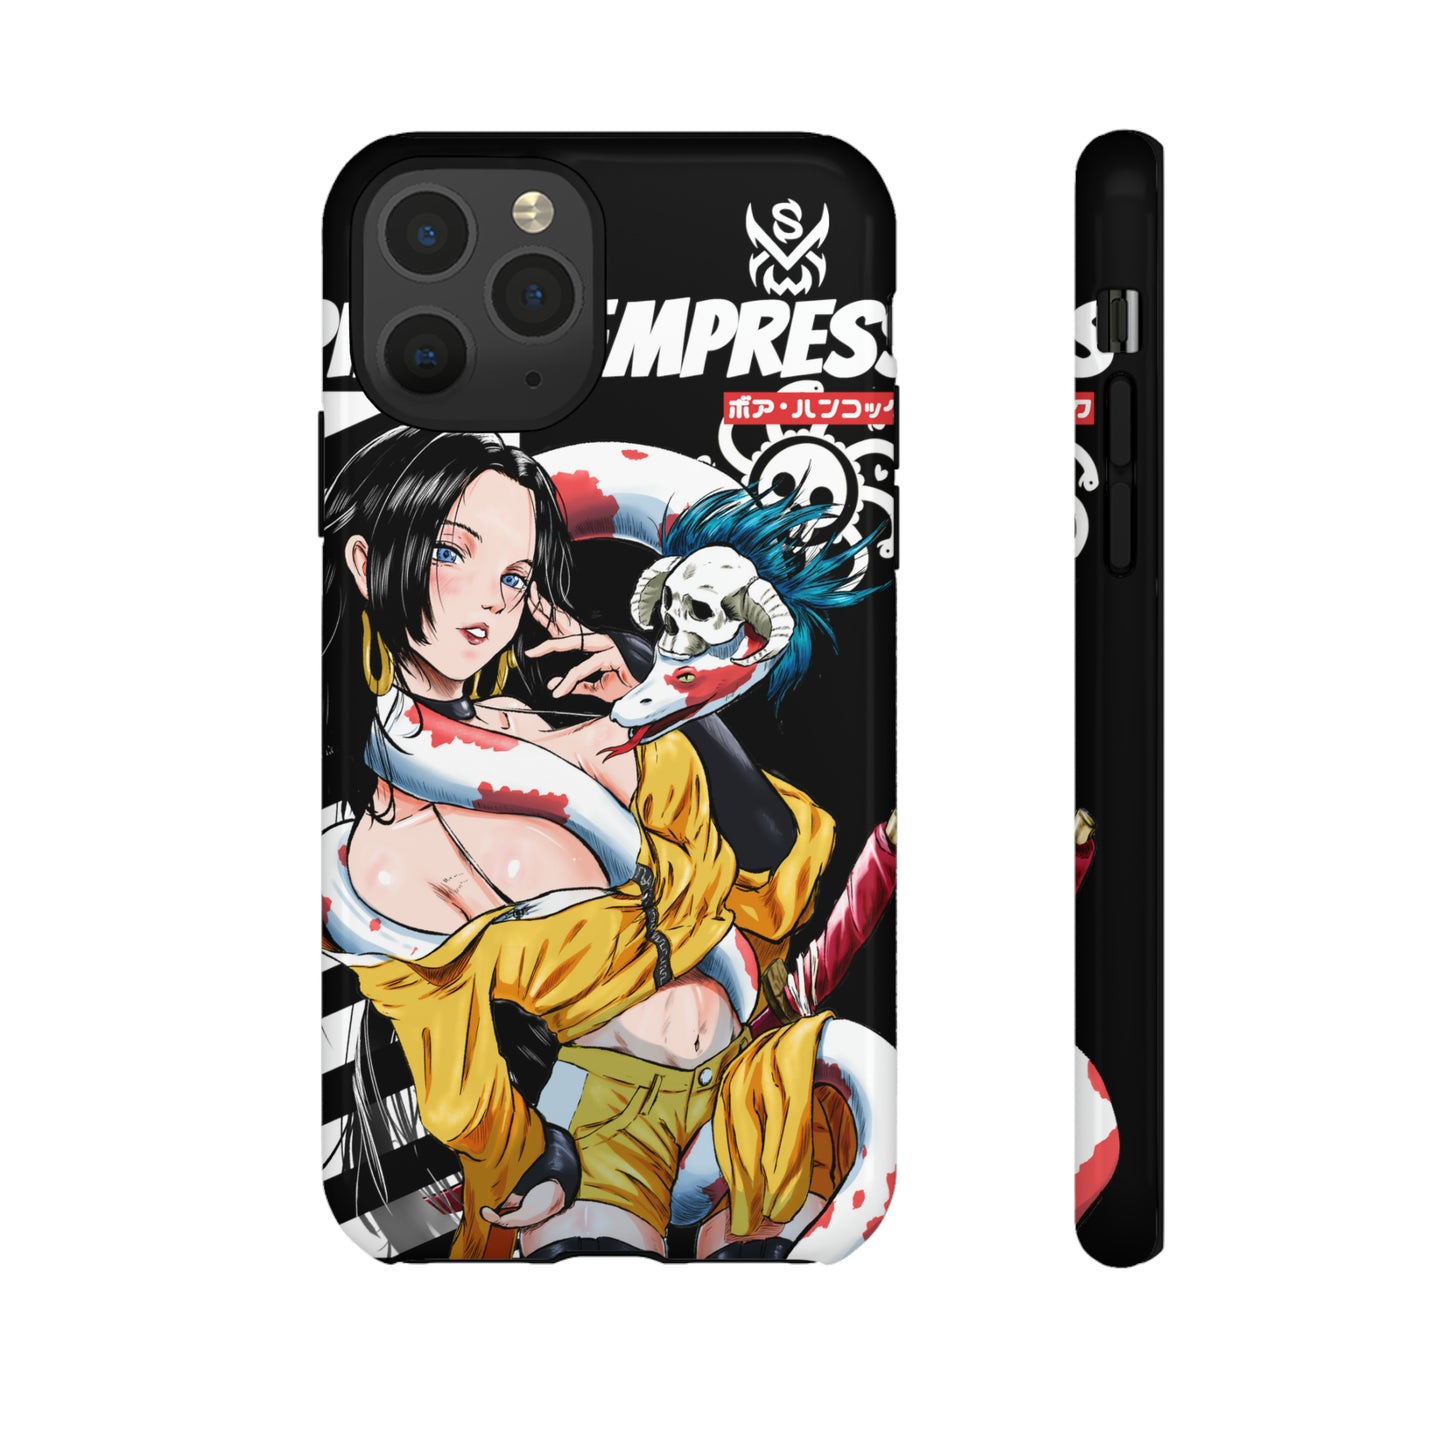 Empress / iPhone Case - LIMITED